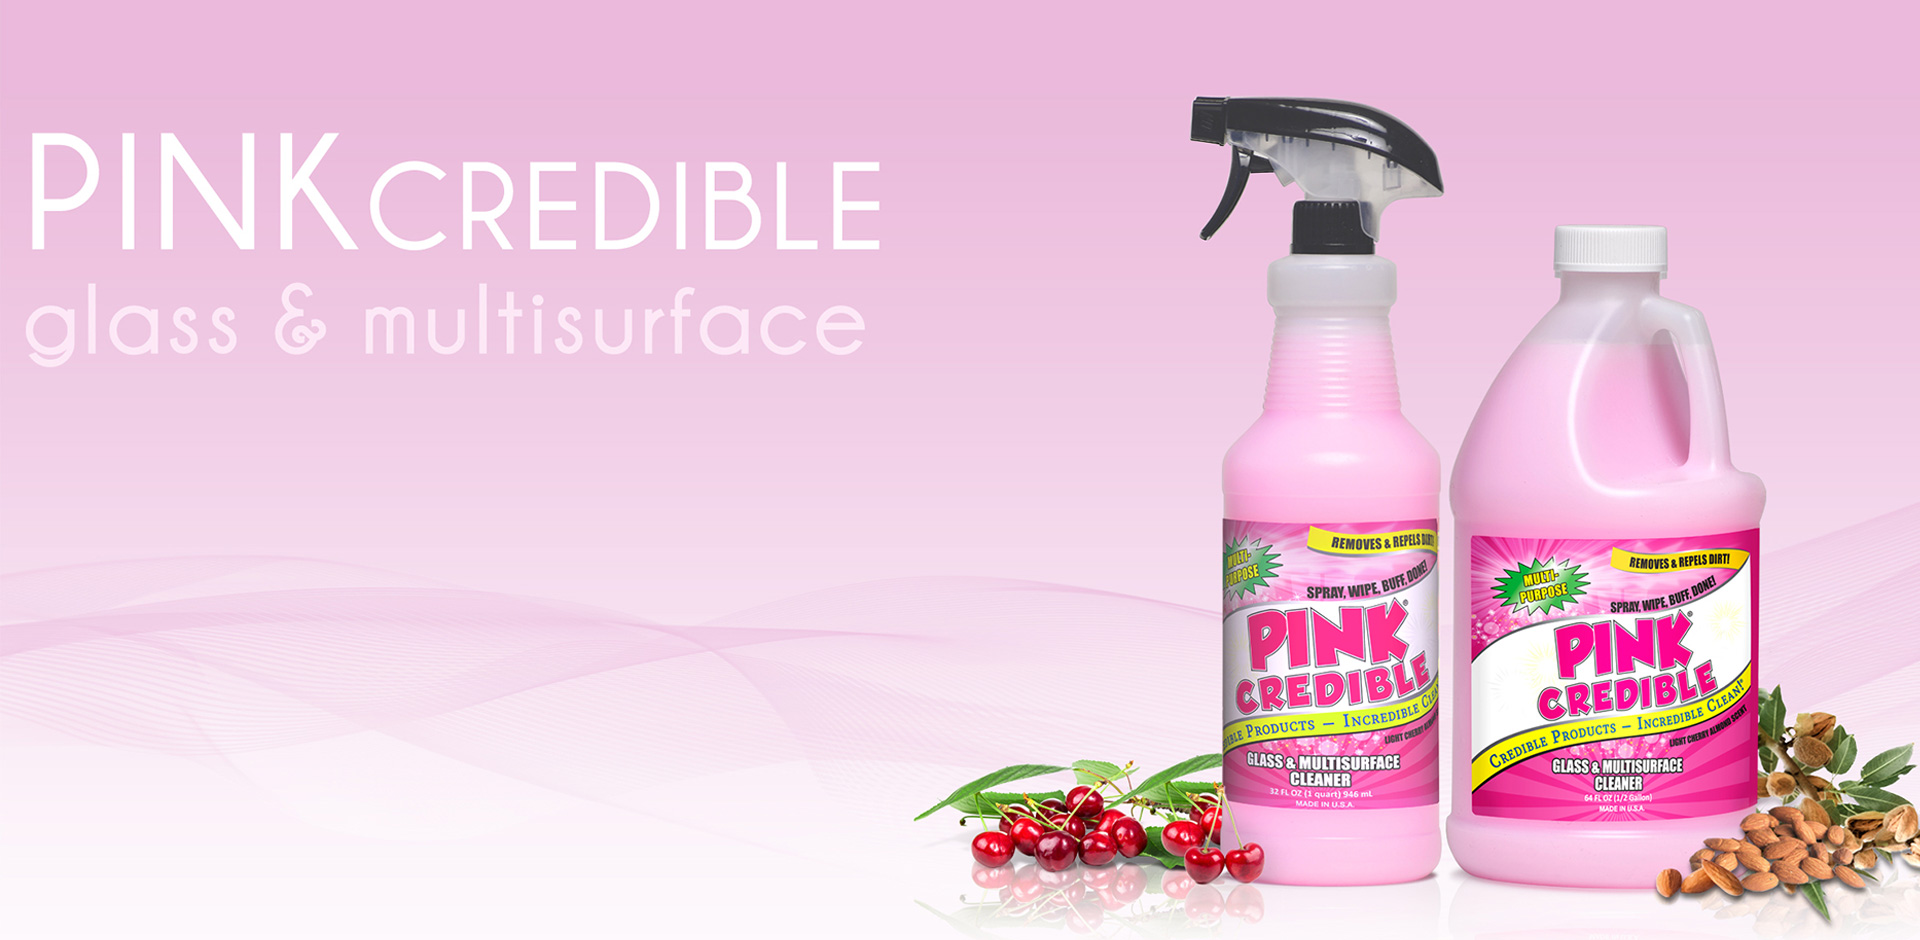 Pink Credible, Glass & Multisurface